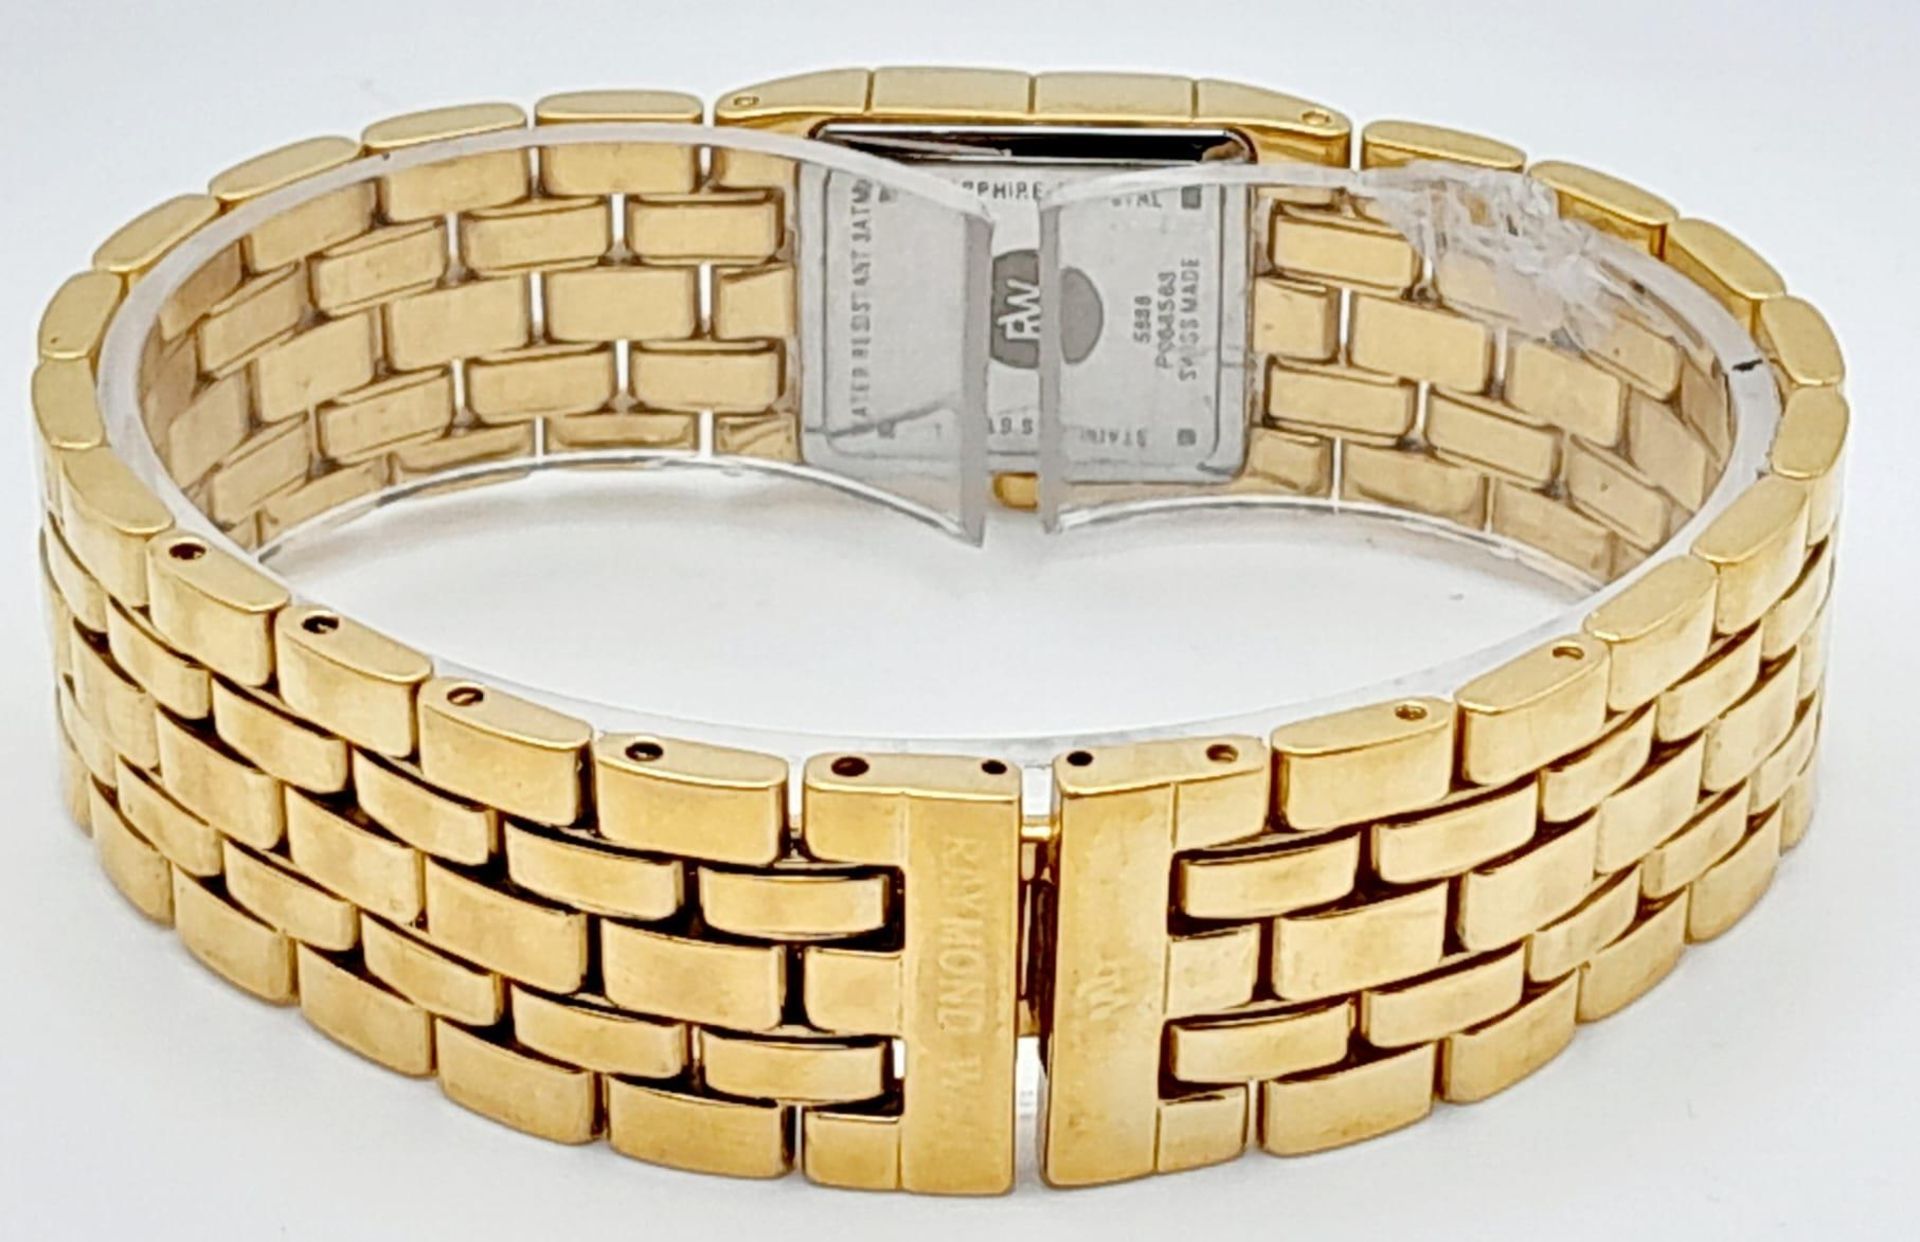 A Beautiful Gold Plated Raymond Weil Ladies Cocktail Watch. Gold plated bracelet and case - 17mm. - Image 3 of 8